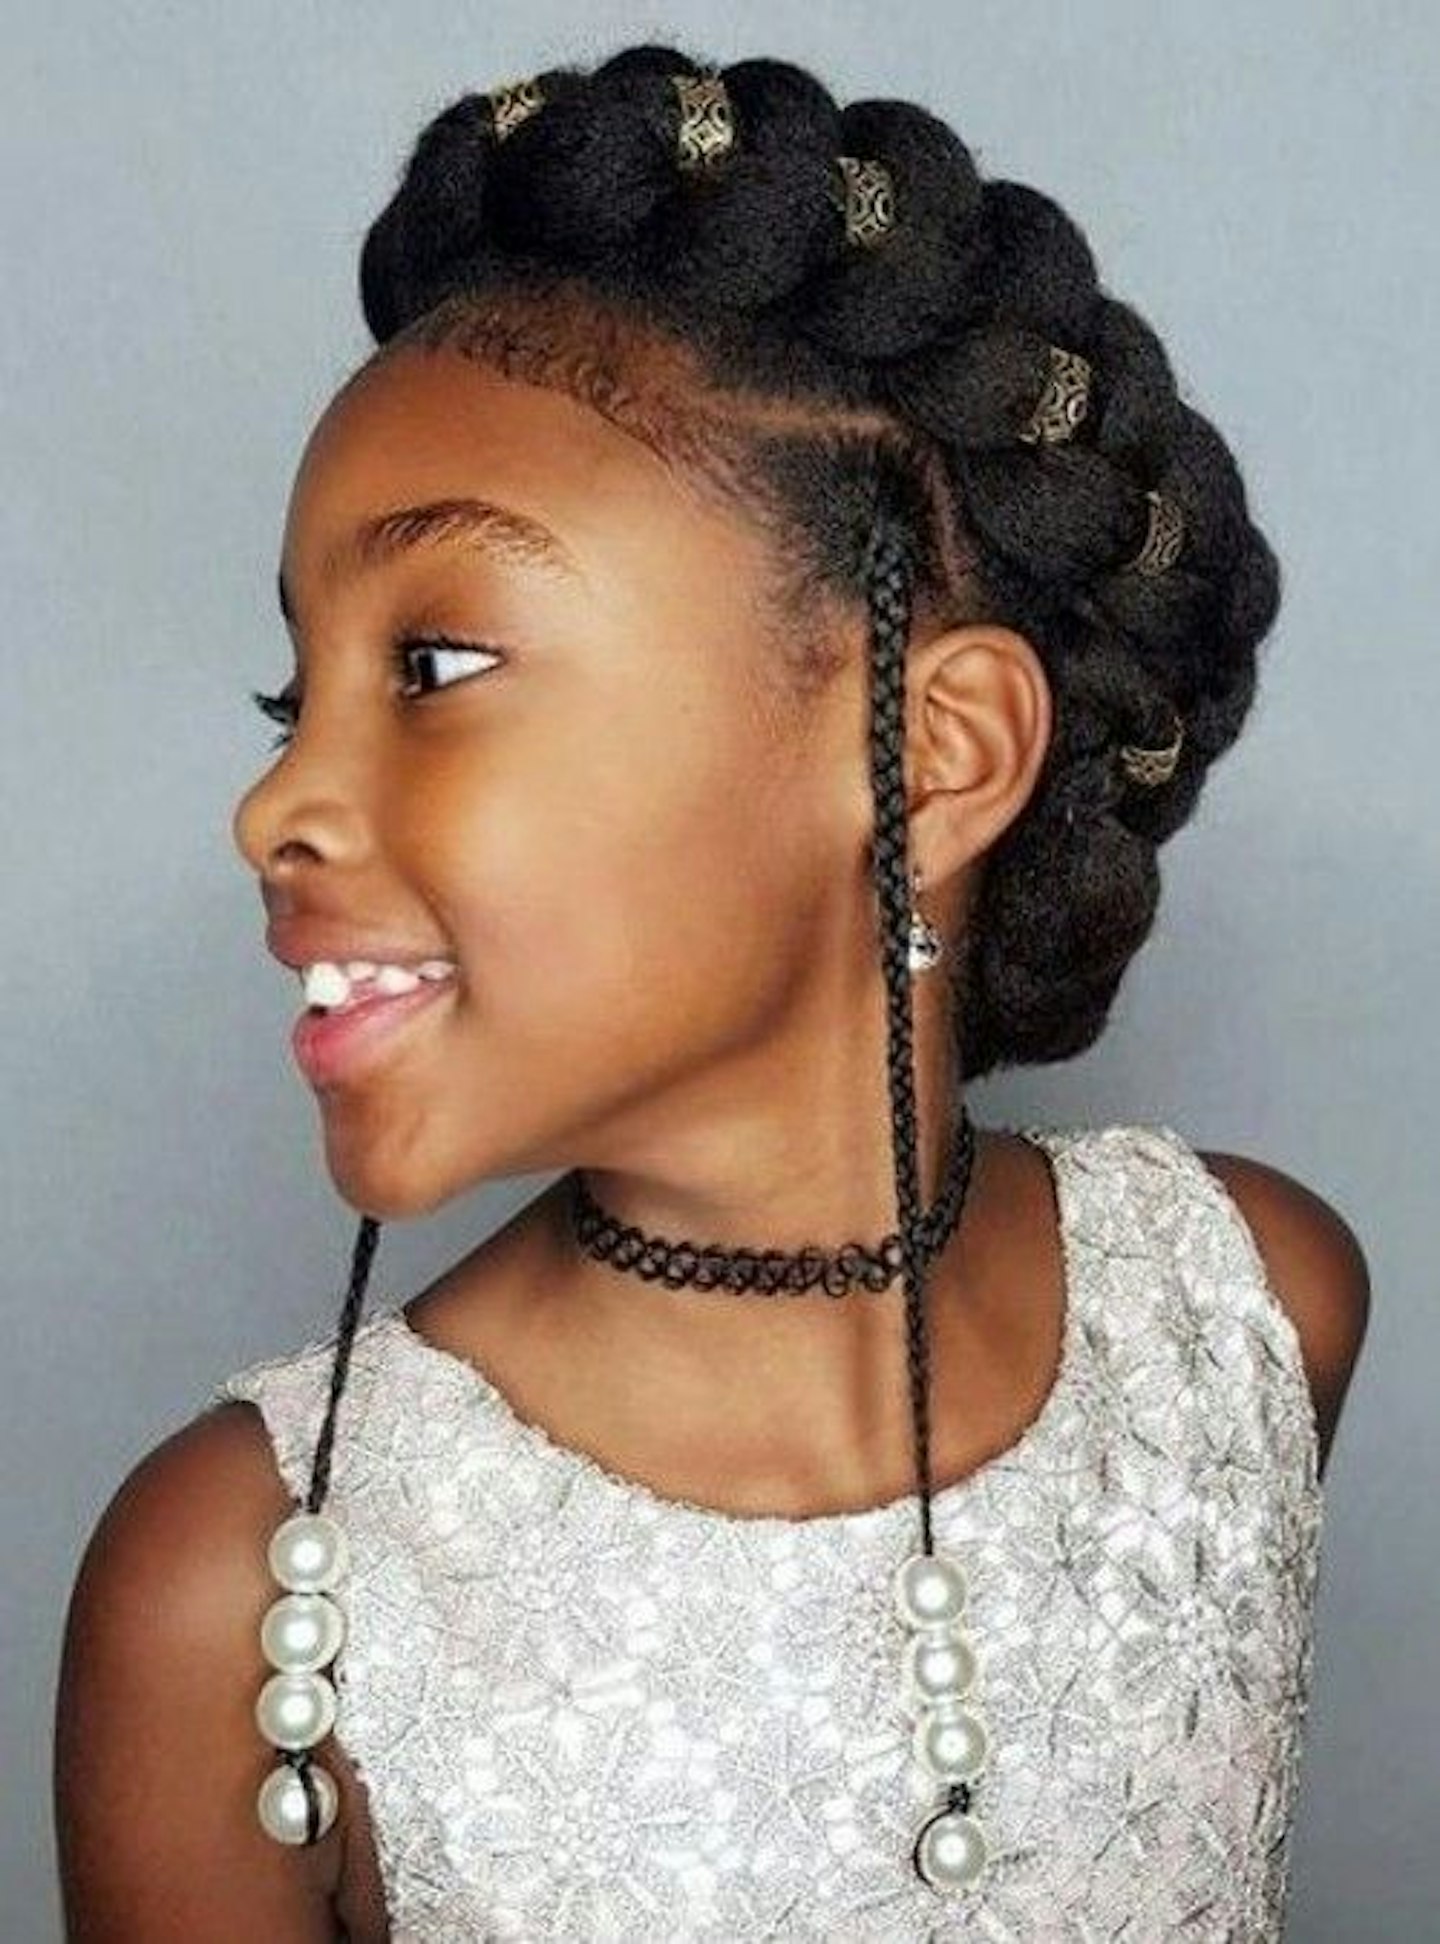 Hairstylist Creates Beads-and-Braids Looks to Help Young Girls Embrace  Their Curls and Kinks